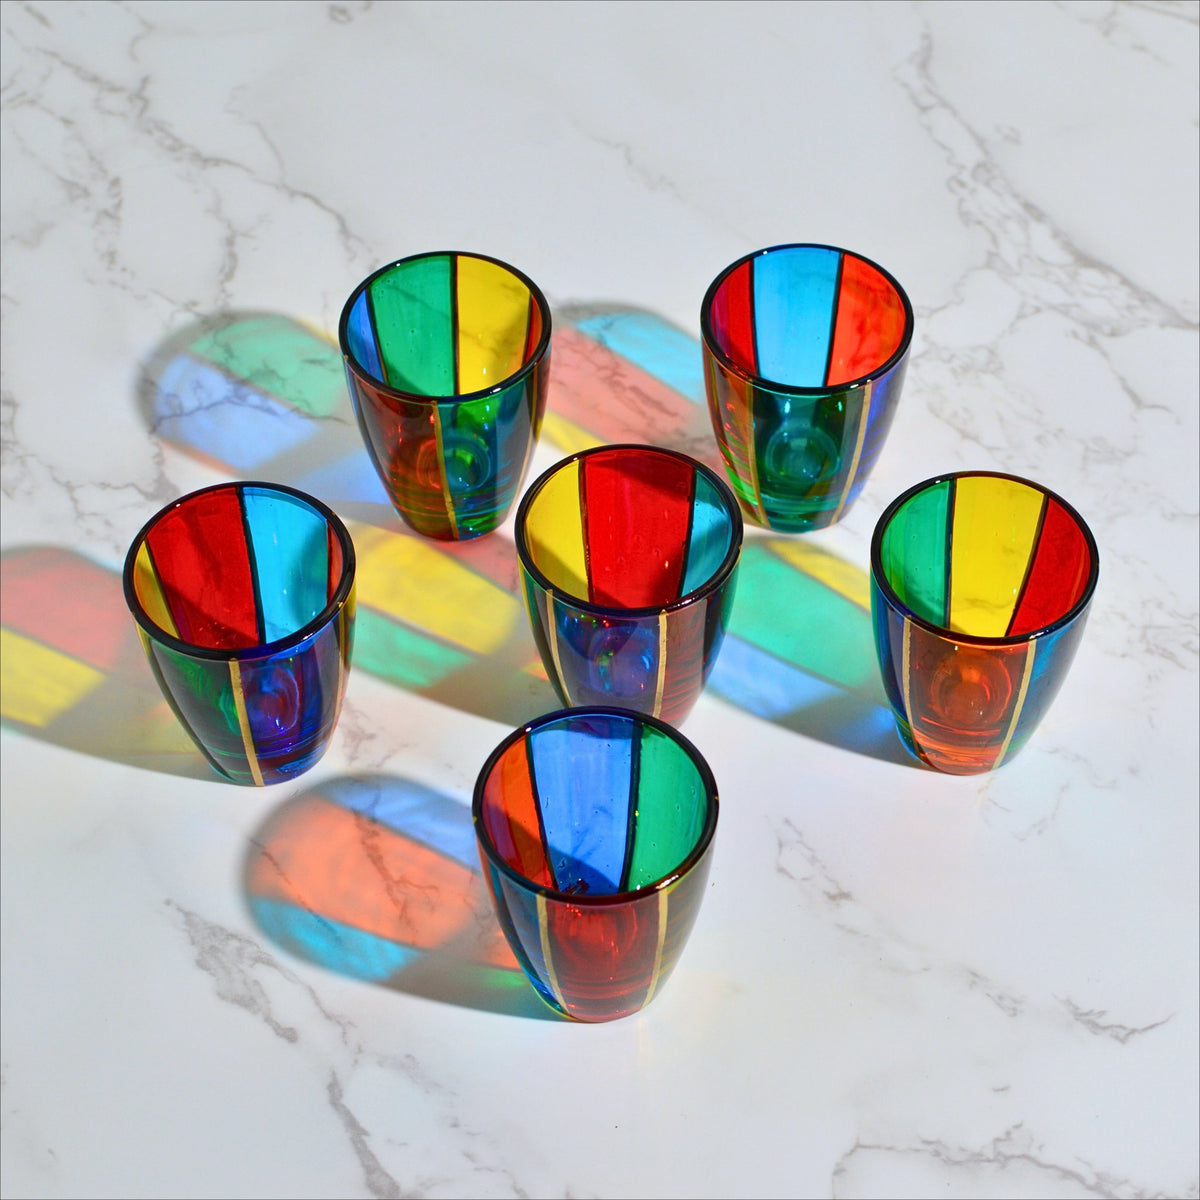 Swatch Shot Glasses Set, Hand Painted Crystal, Made in Italy - My Italian Decor